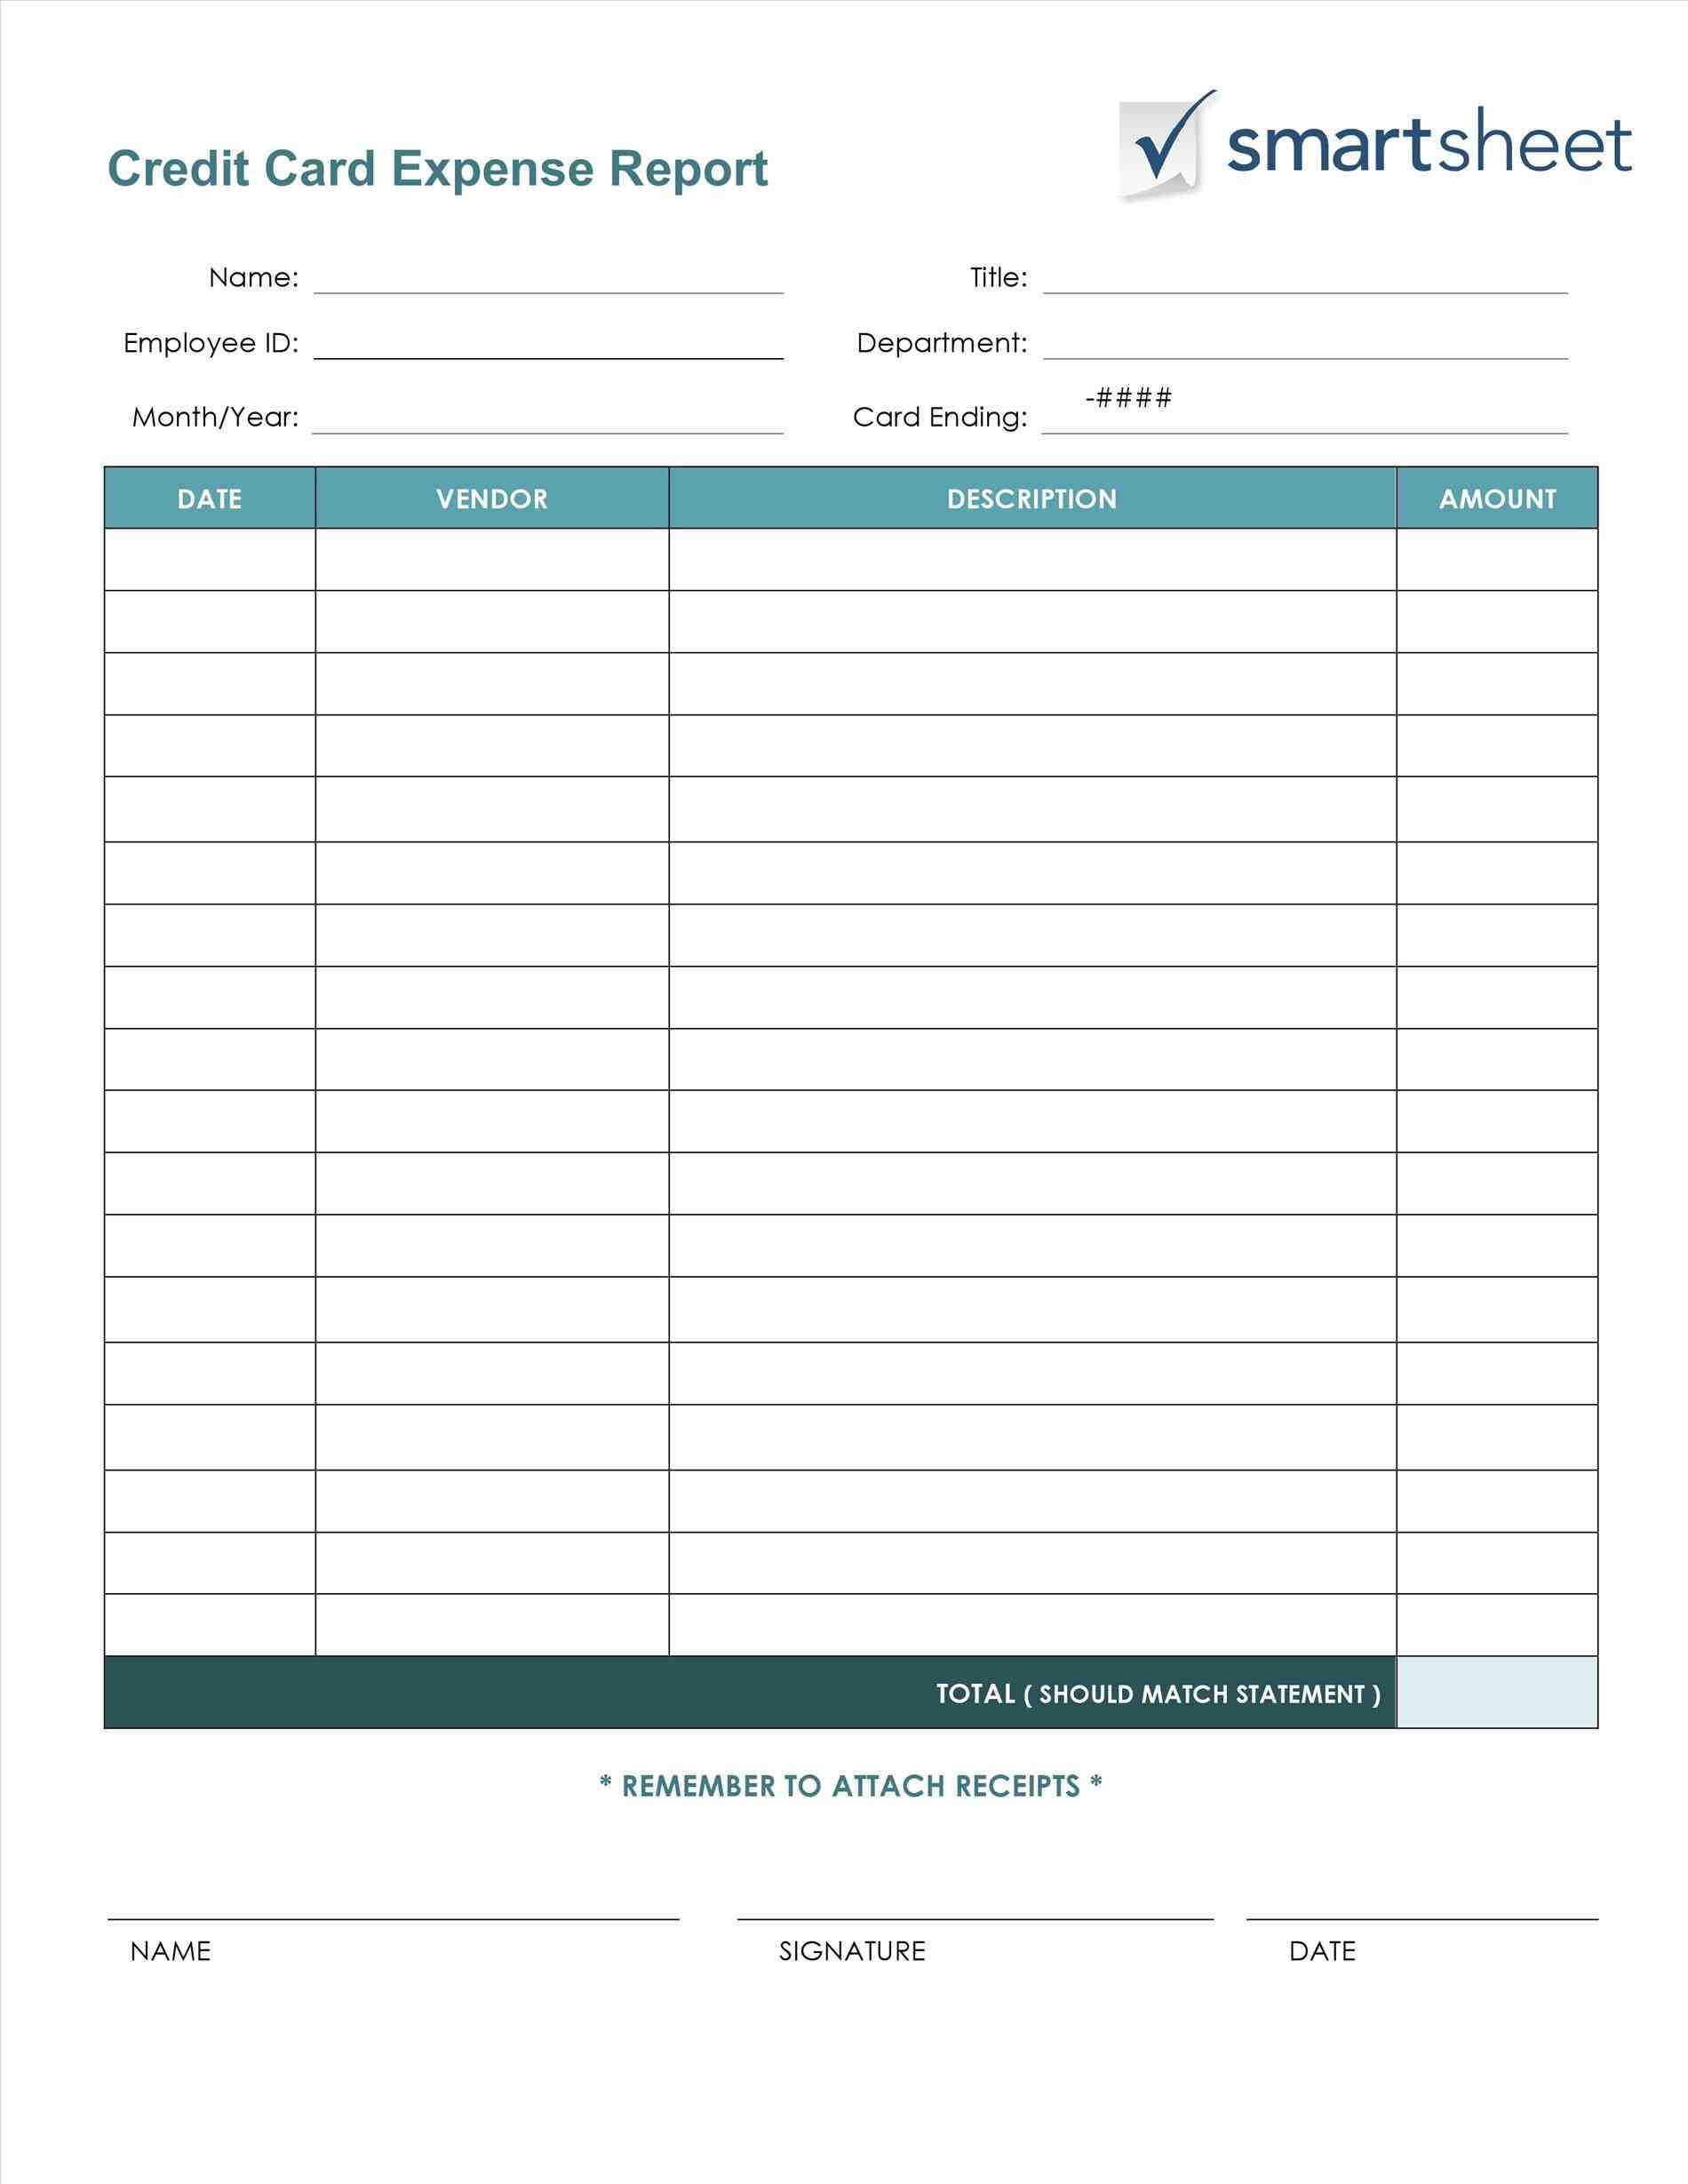 Report Template business monthly expense report and template sample vlashed introduction letter monthly Monthly Expense Report Template expense report template